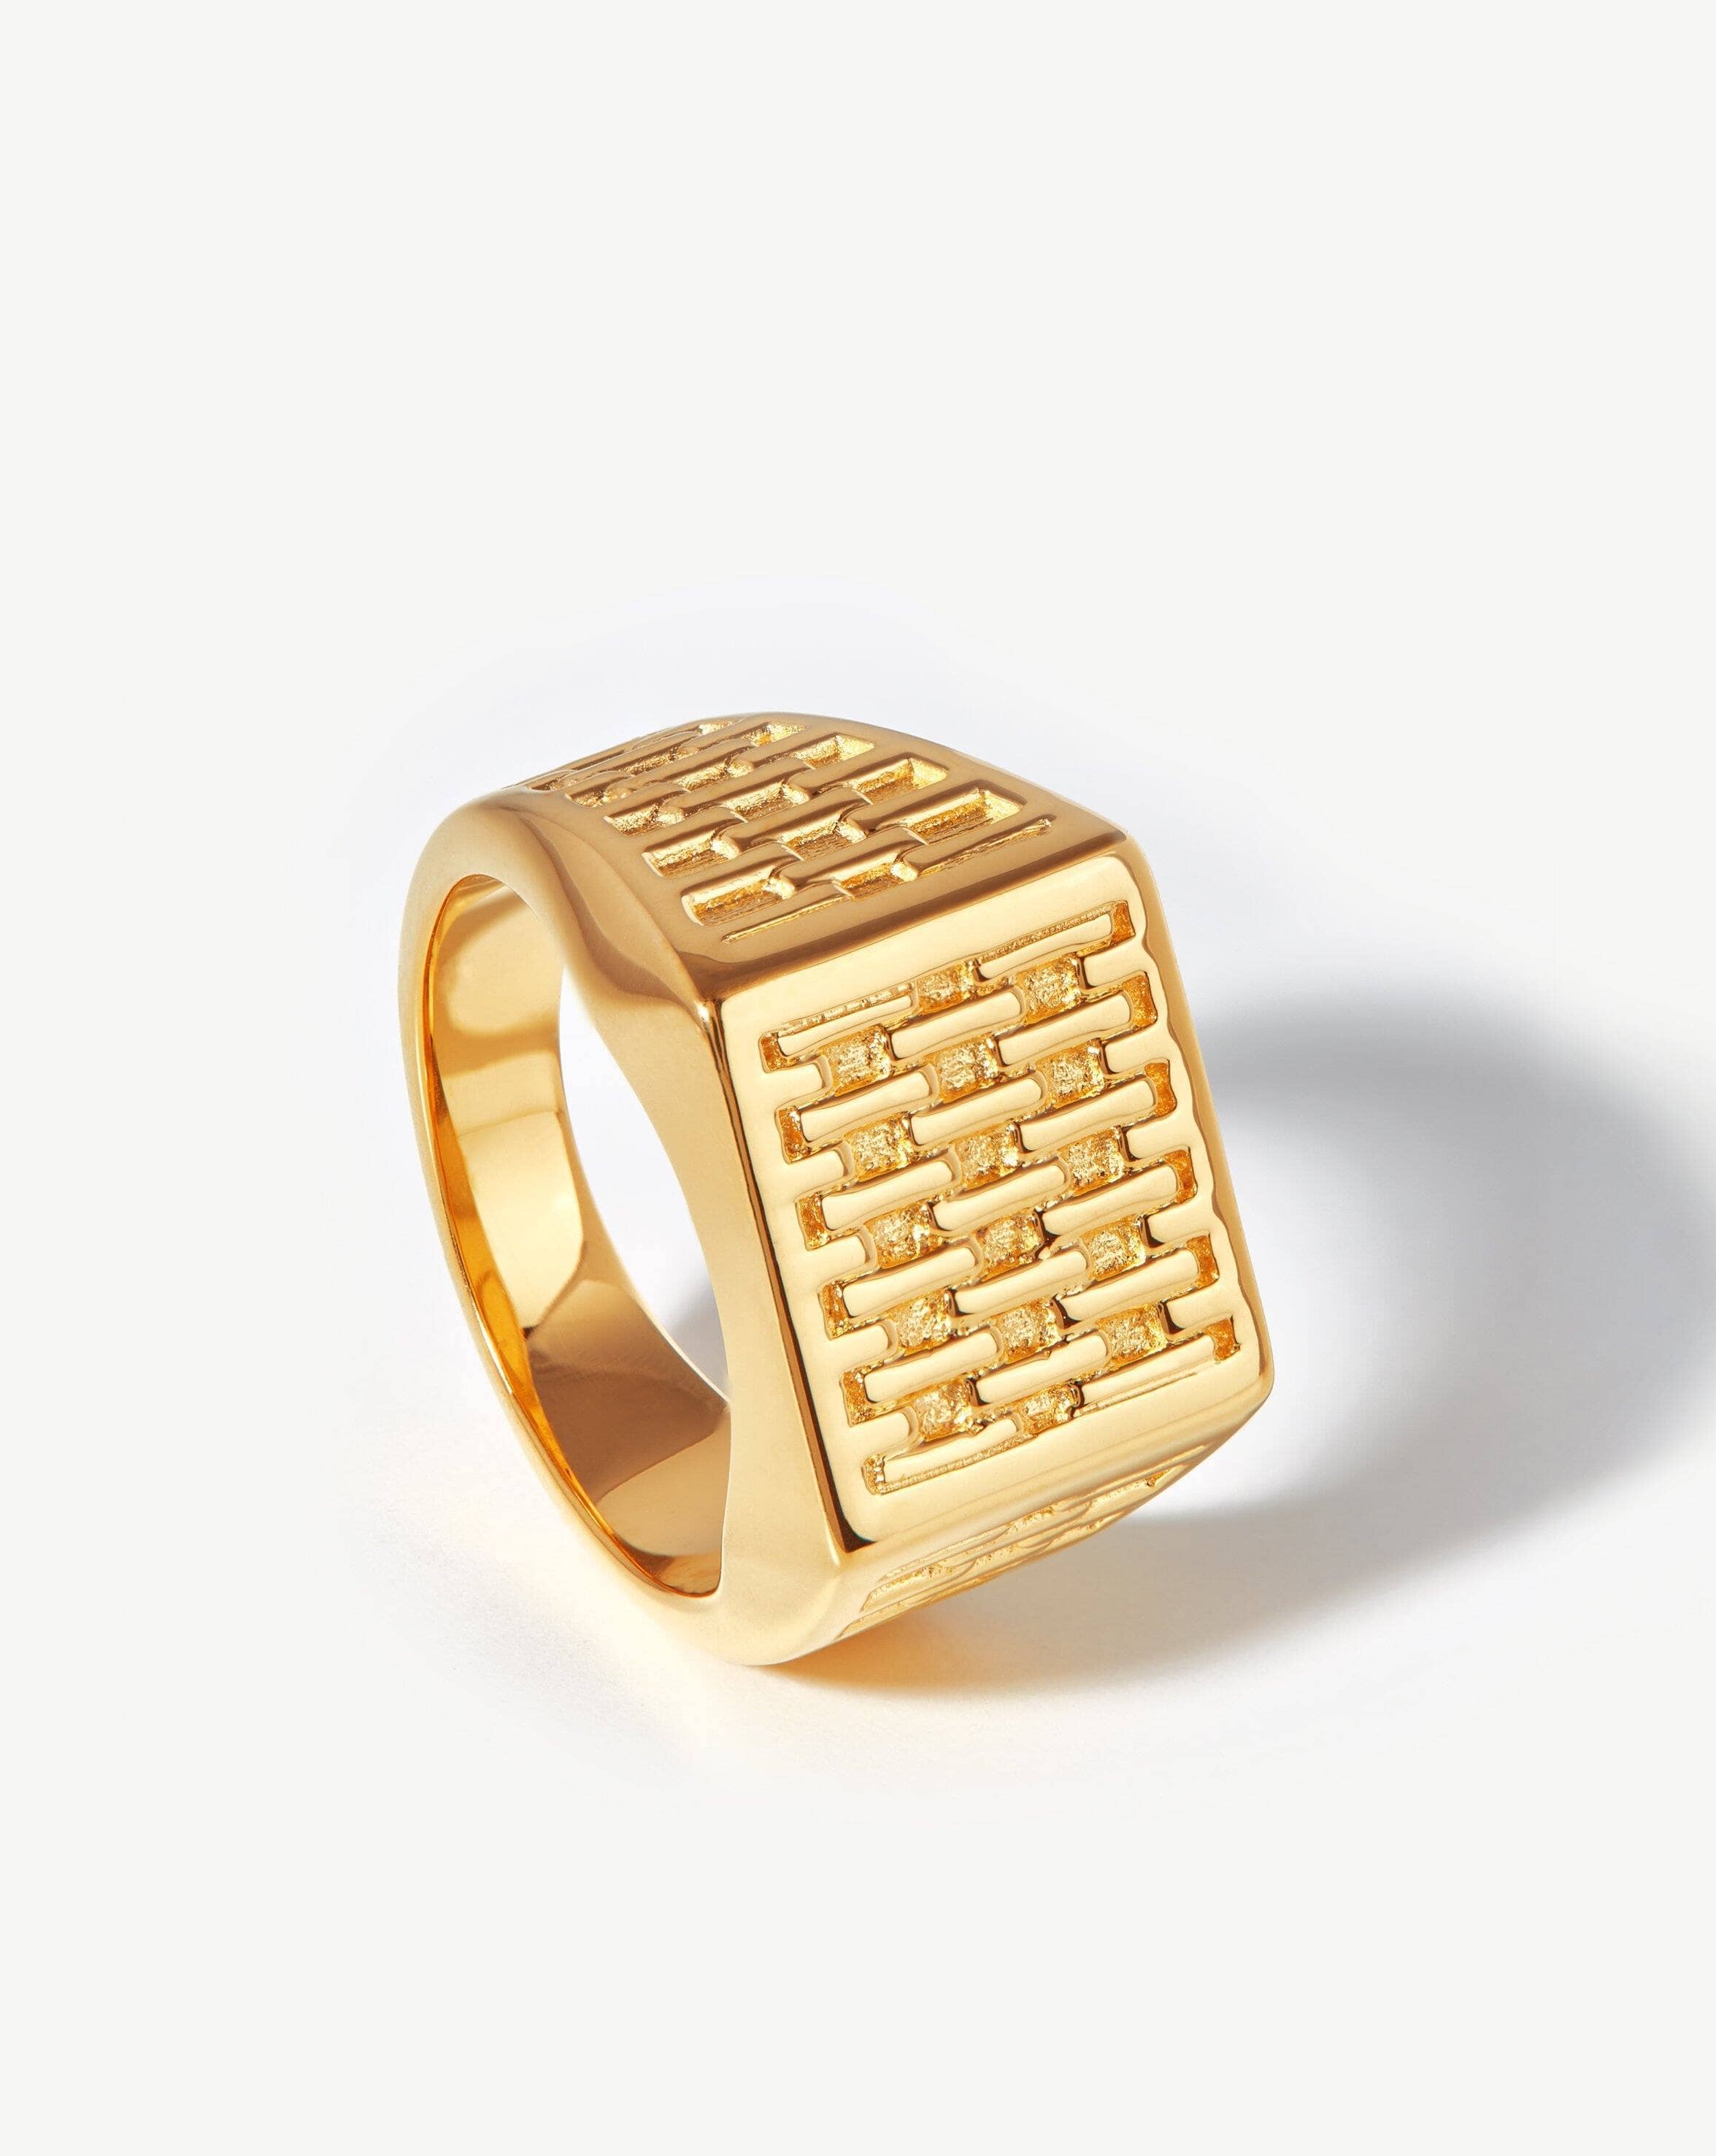 Yellow Gold Men's Square Stylish Solid Signet Ring | Factory Direct Jewelry